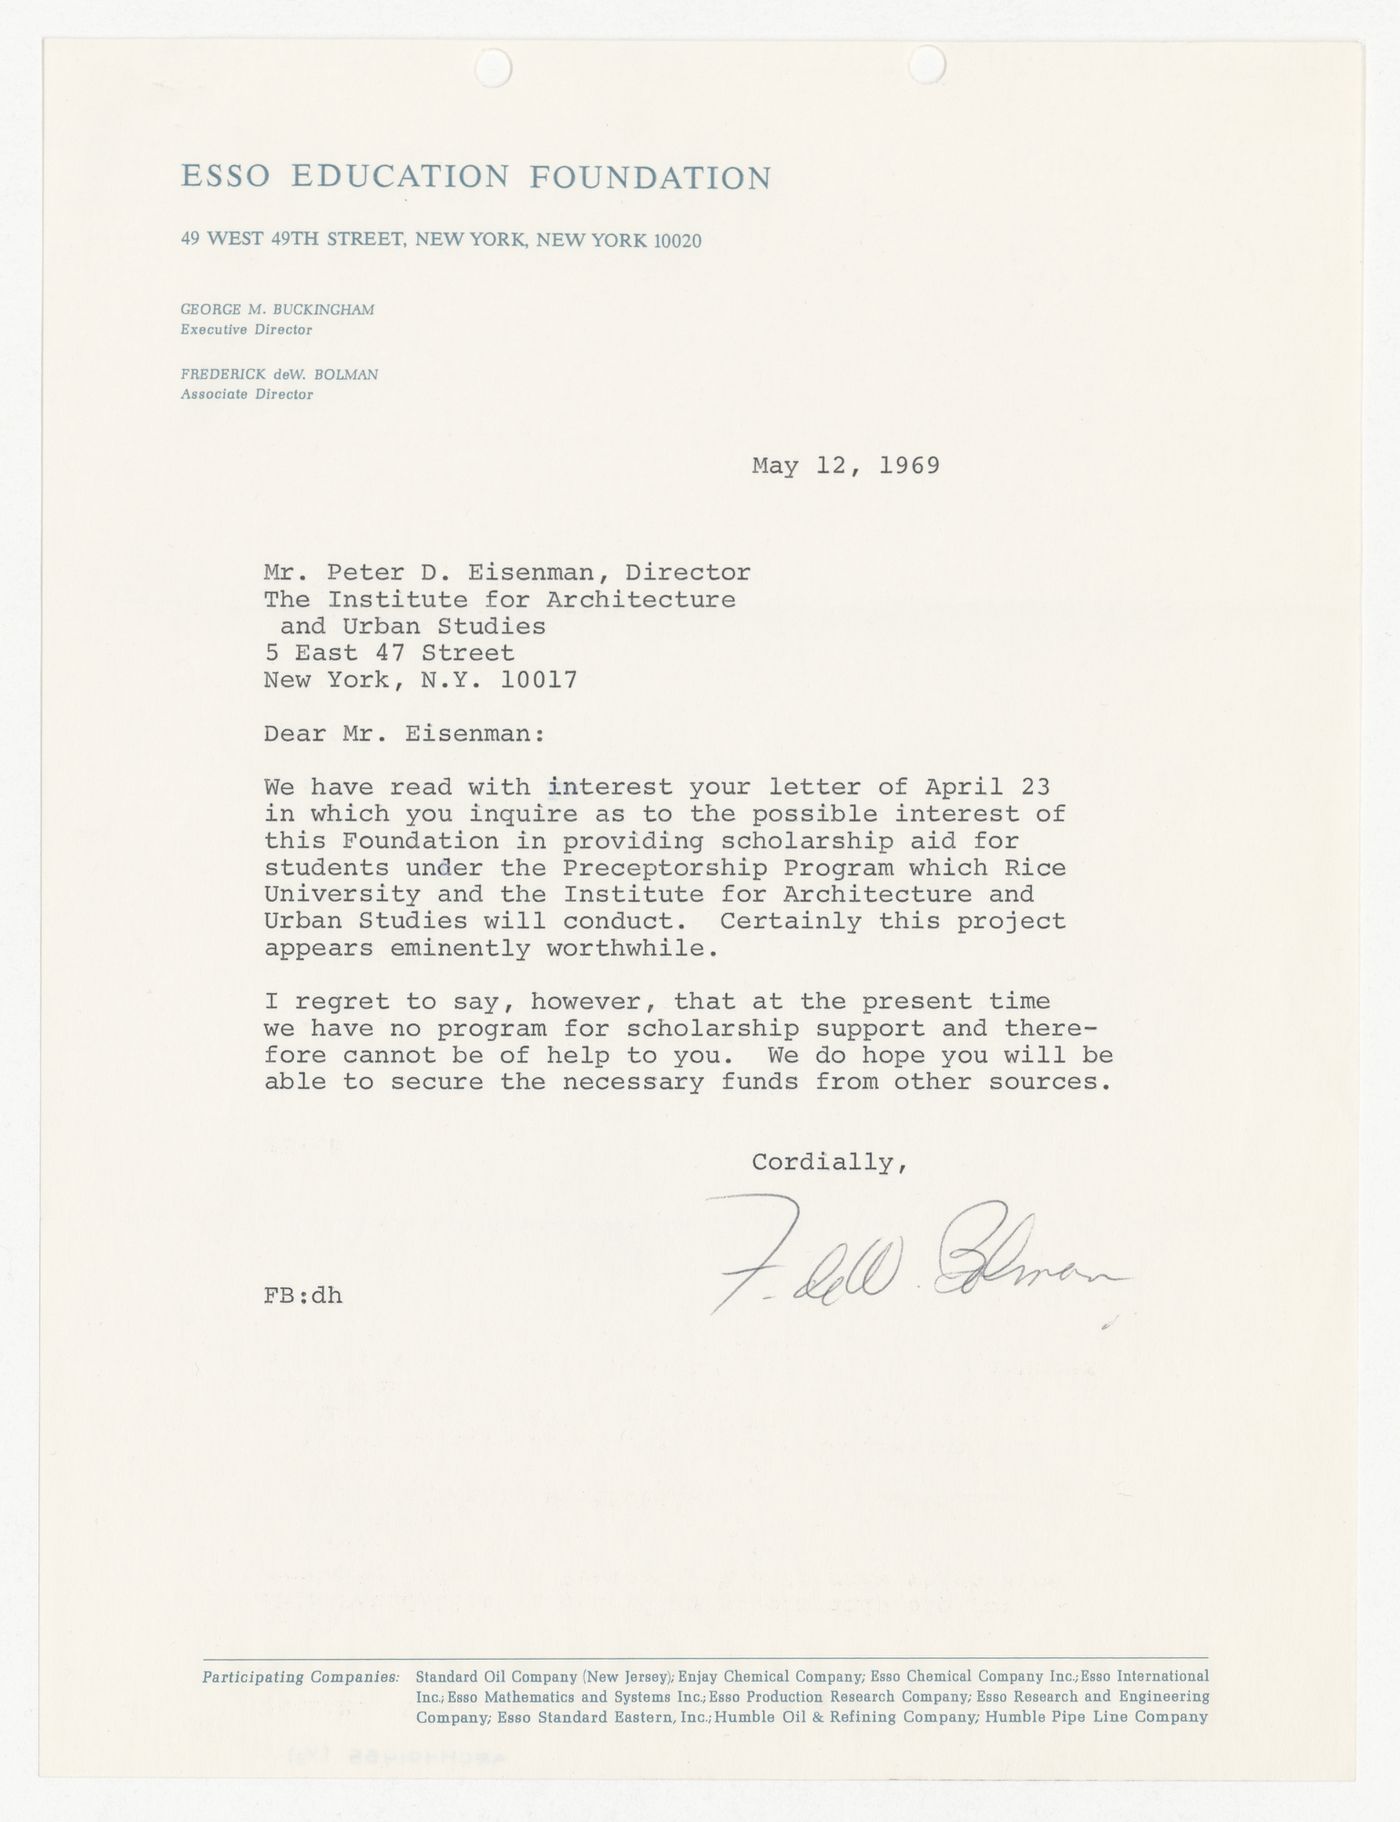 Letter from Frederick deW. Bolman to Peter D. Eisenman responding to donation request made by Eisenman with attached copy of original letter